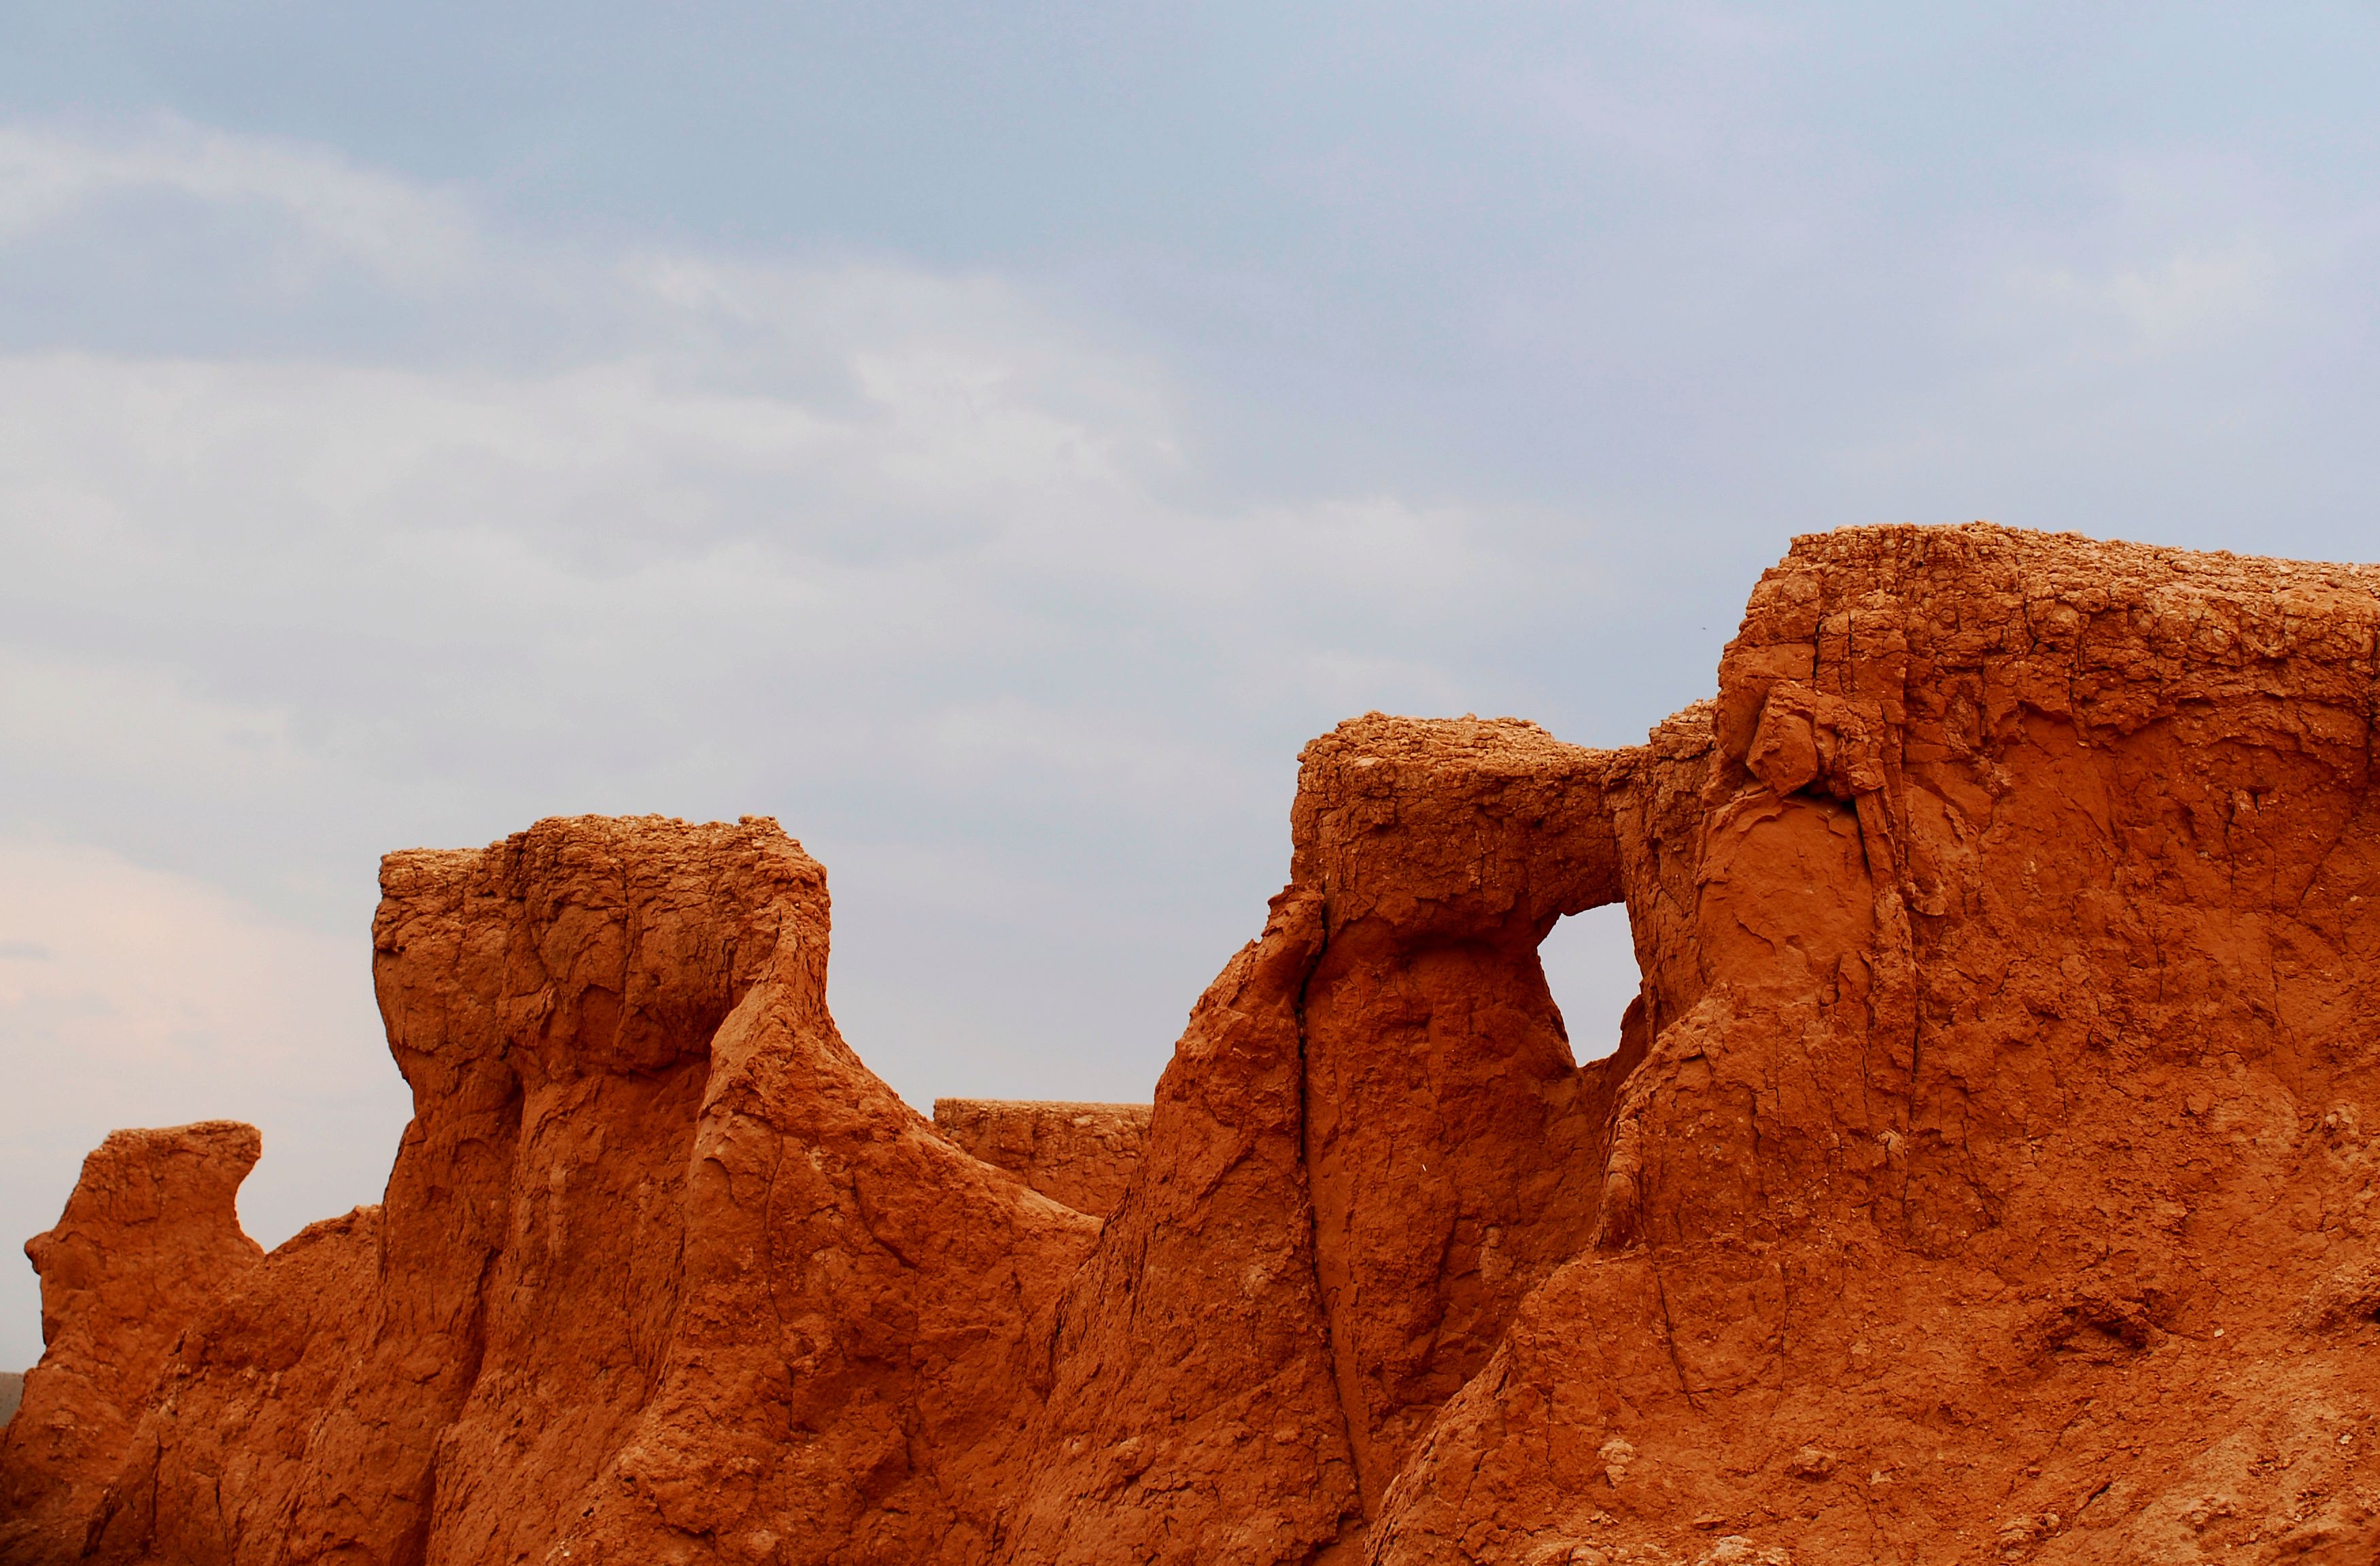 A sandstone at the Flaming Cliffs, the northern Gobi Desert, Mongolia